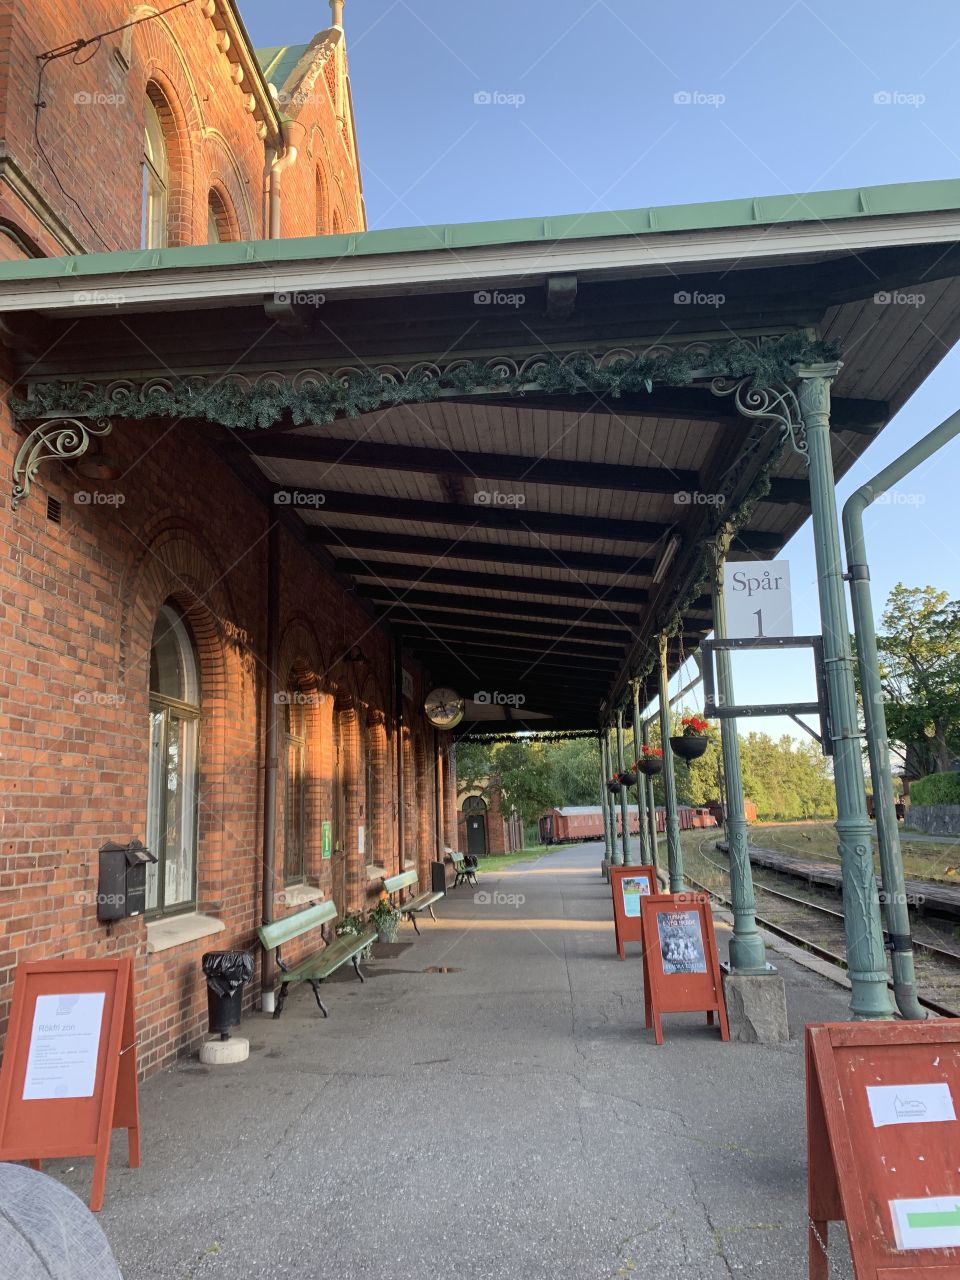 Old train station from over 100 years ago/ Sweden 